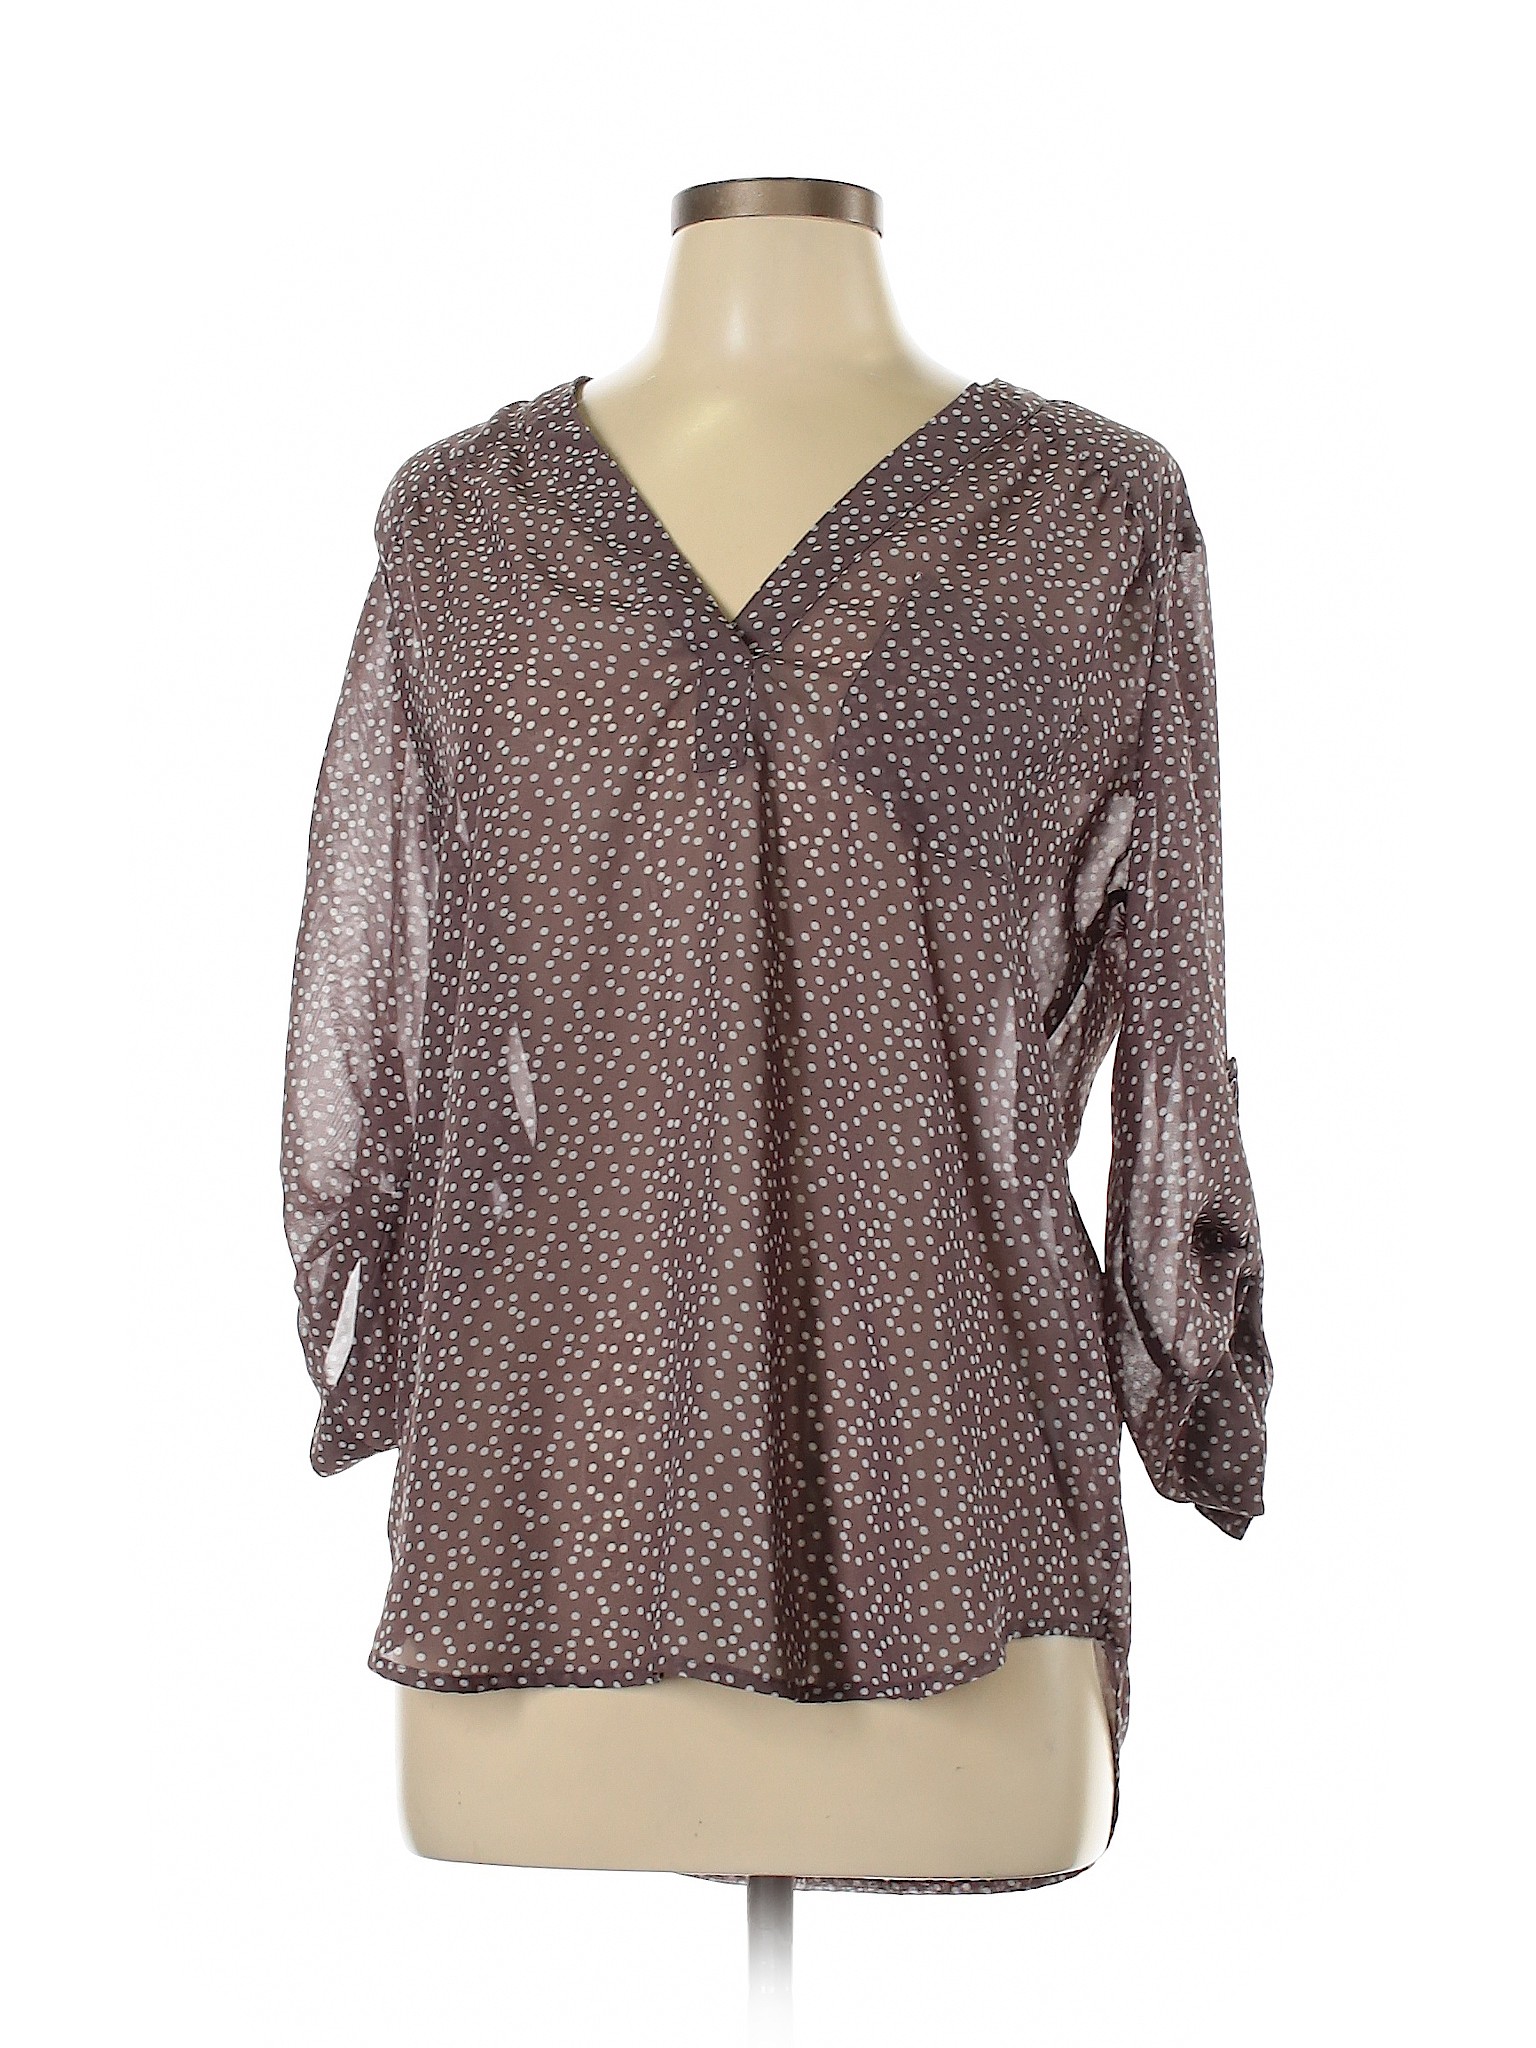 Maurices Women Brown 3/4 Sleeve Blouse L | eBay